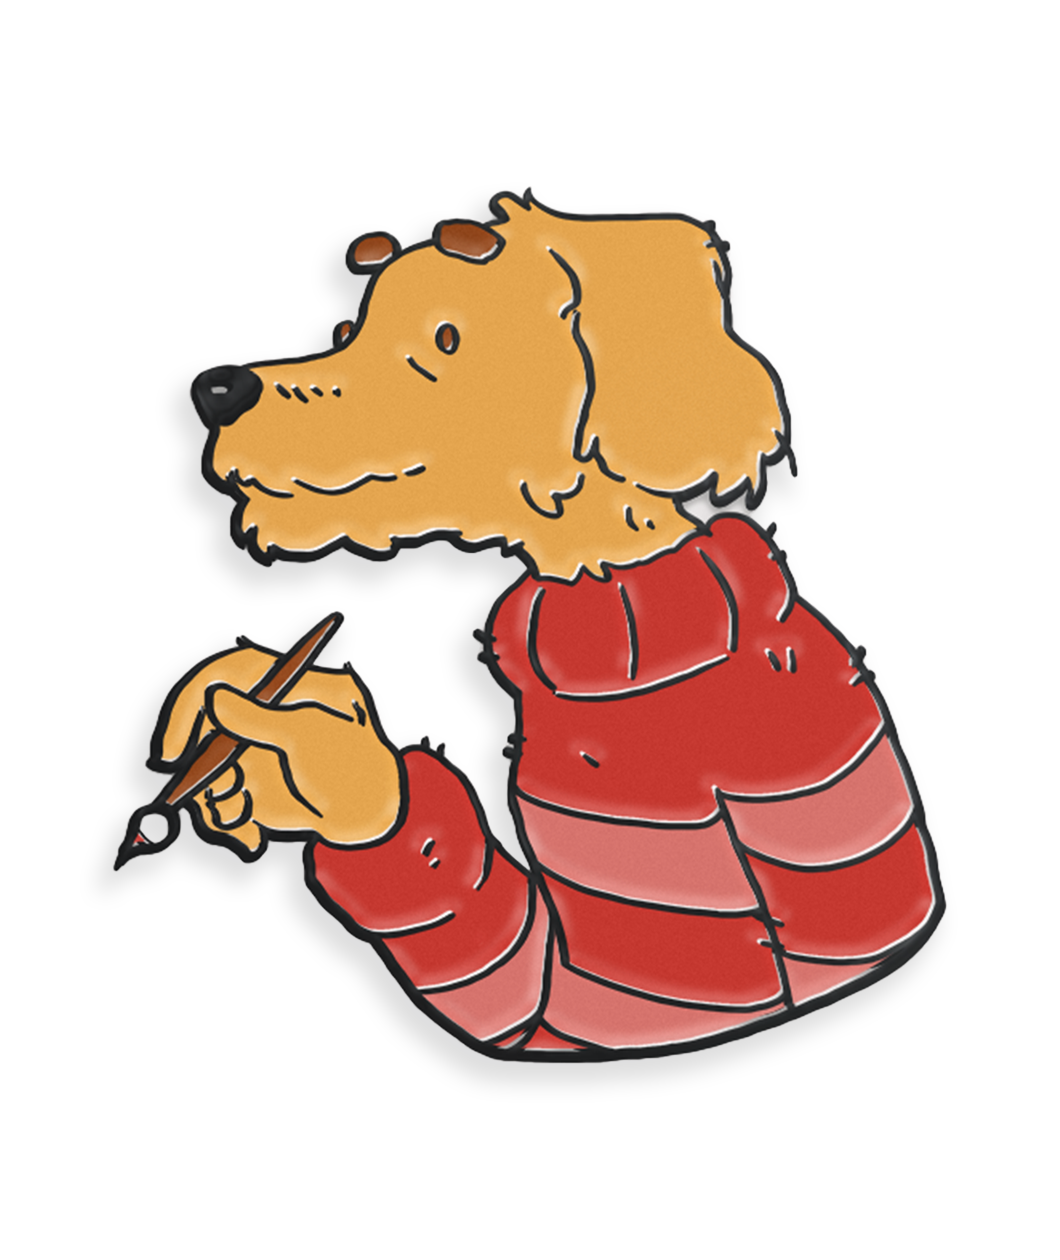 A pin shaped like the top half of a dog. The dog is a sandy color swearing a striped red sweater and holding a paintbrush. The painting dog pin from Mateusz Urbanowicz. 